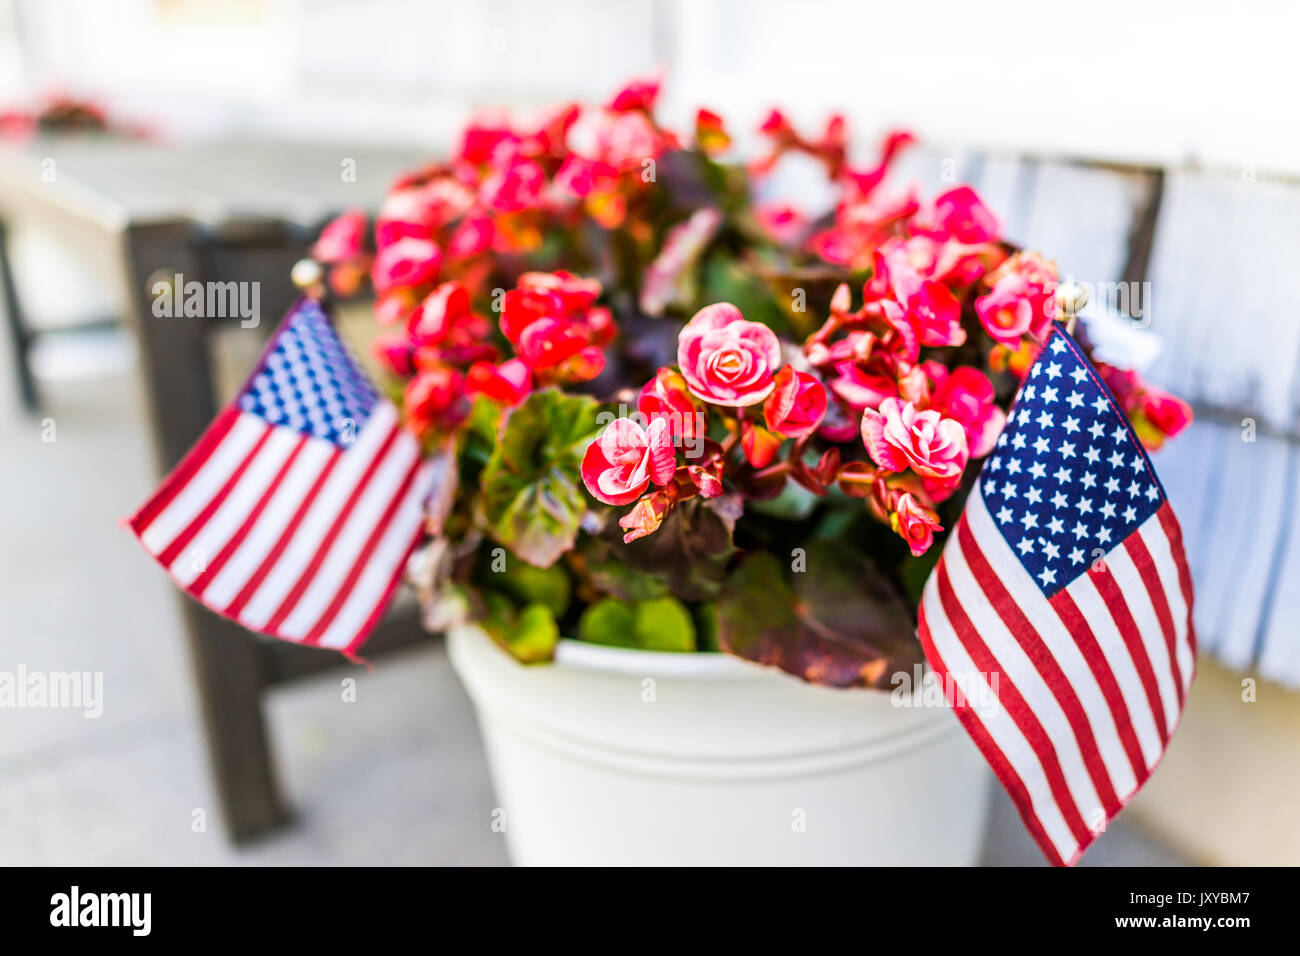 Patriotic flower pot with American flags and pink or red begonia flowers on porch Stock Photo